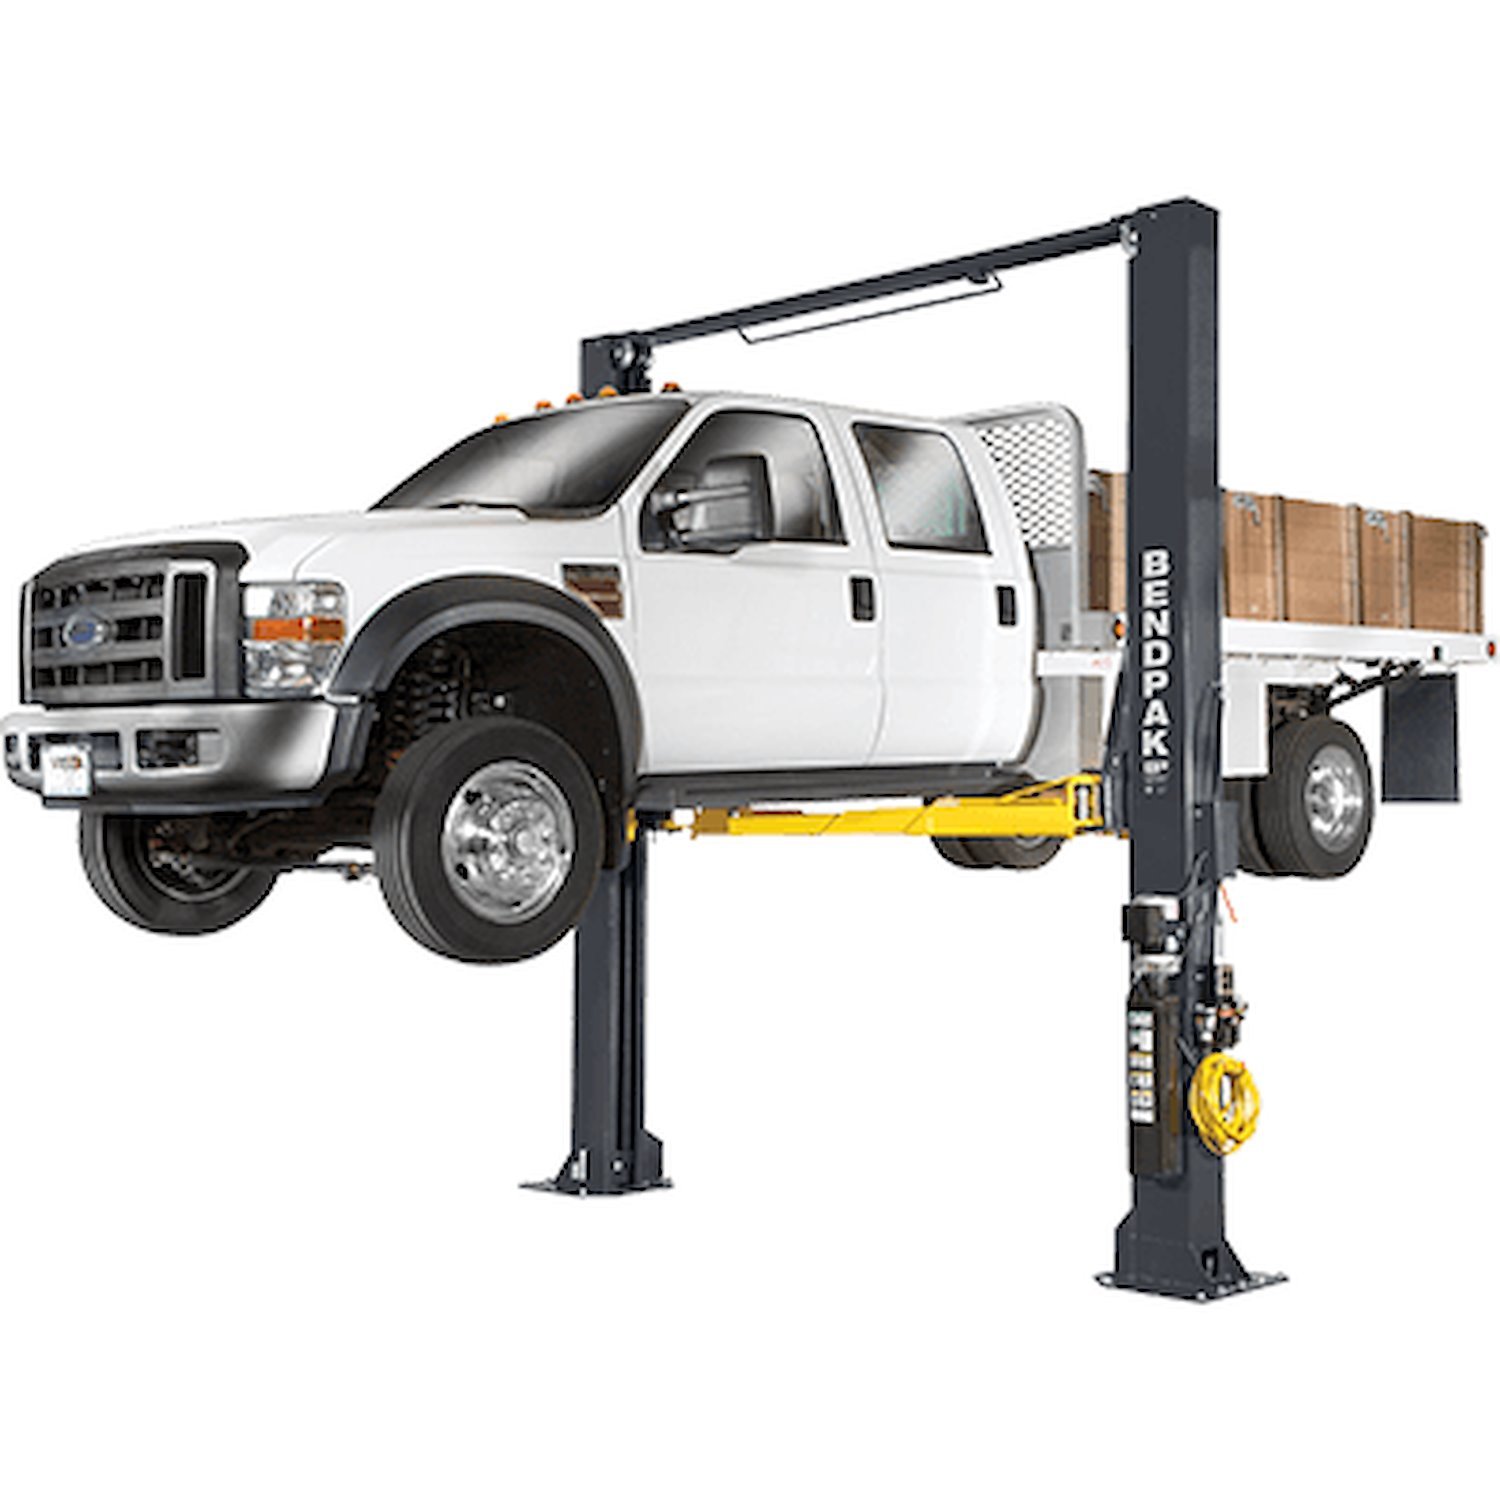 XPR-12CL-192-LTA Two-Post Lifts, Long-Reach Arms, 12,000-lb. Capacity